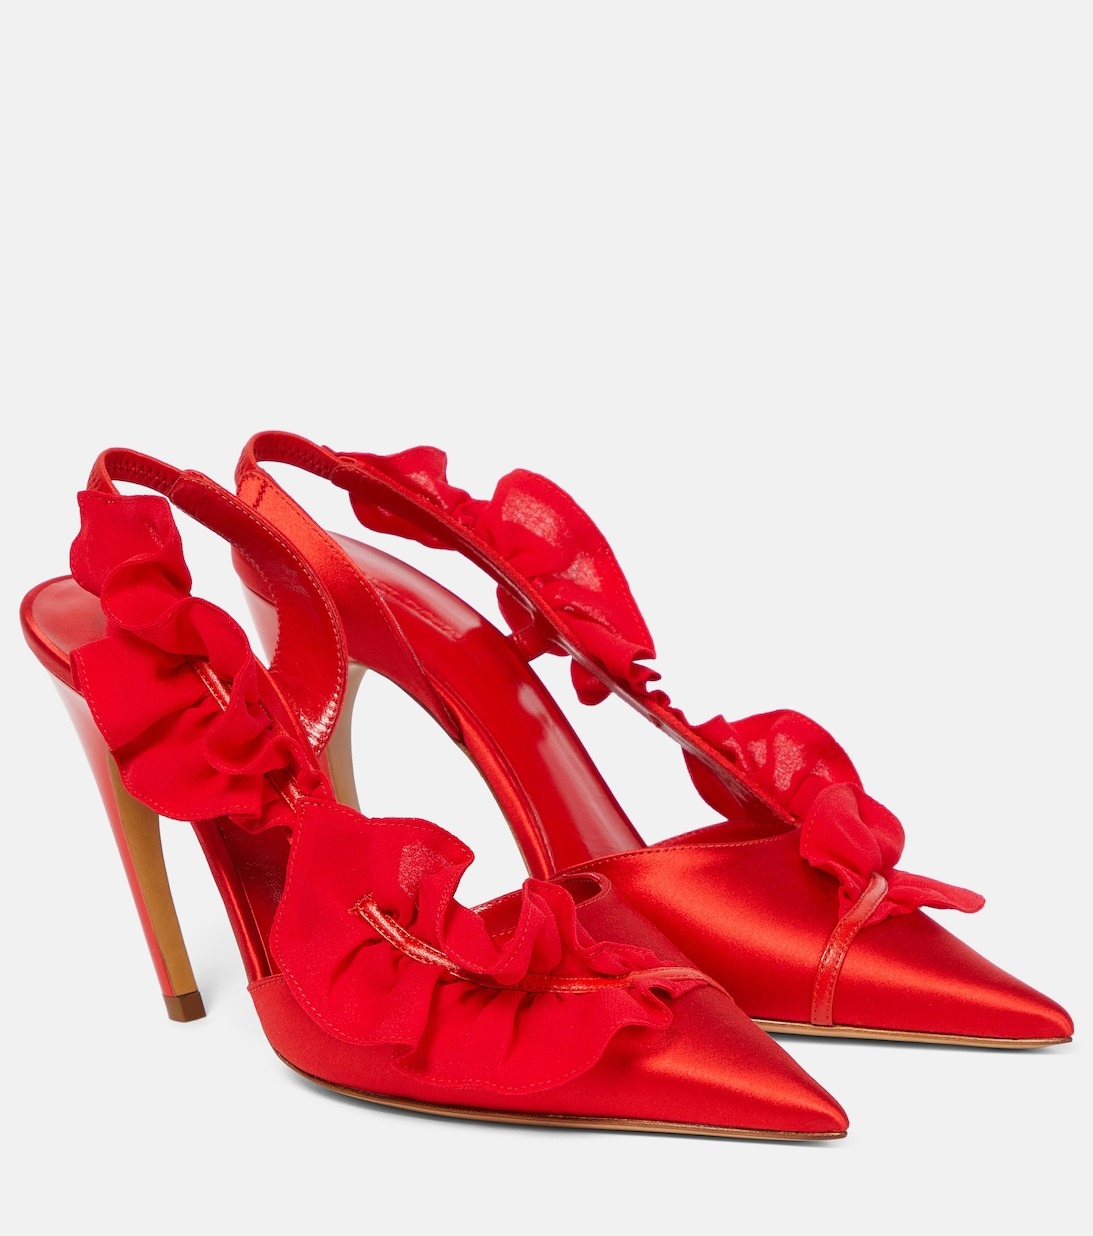 These 16 Designer Shoes Are Shockingly Pretty | Who What Wear